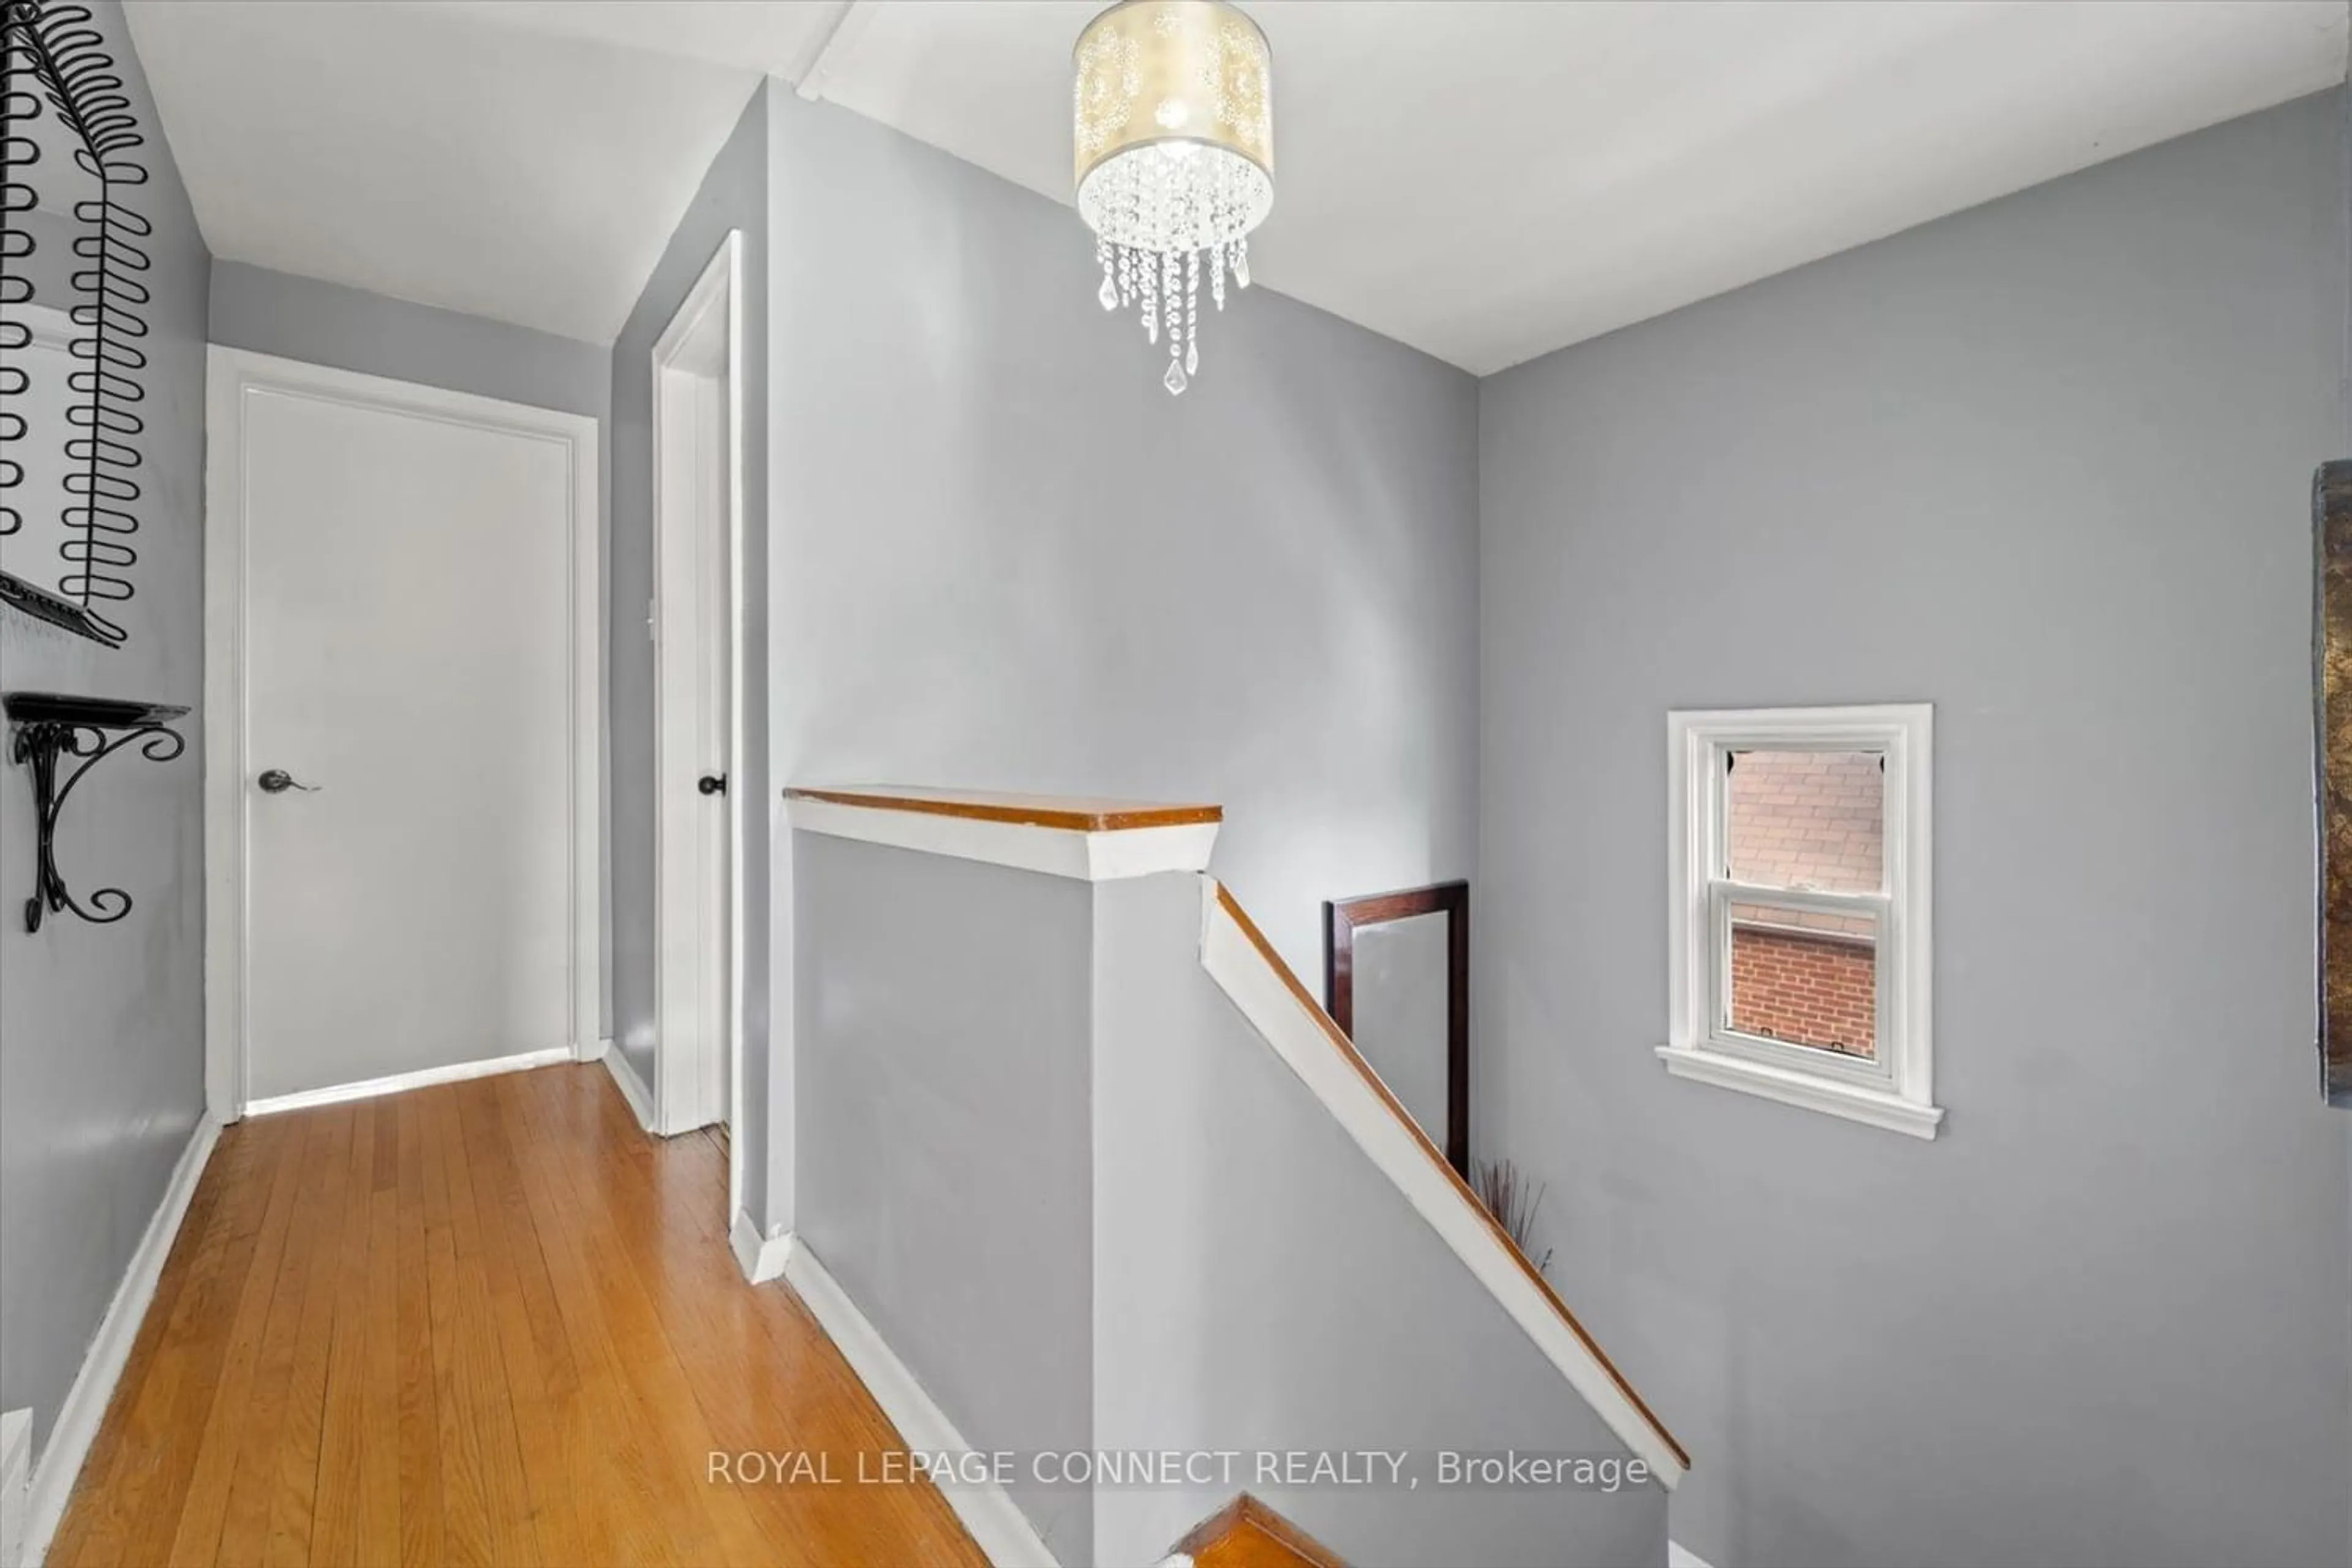 Foyer or entryway or lobby or floor landing area for 60 Fitzgibbon Ave, Toronto Ontario M1K 4A2